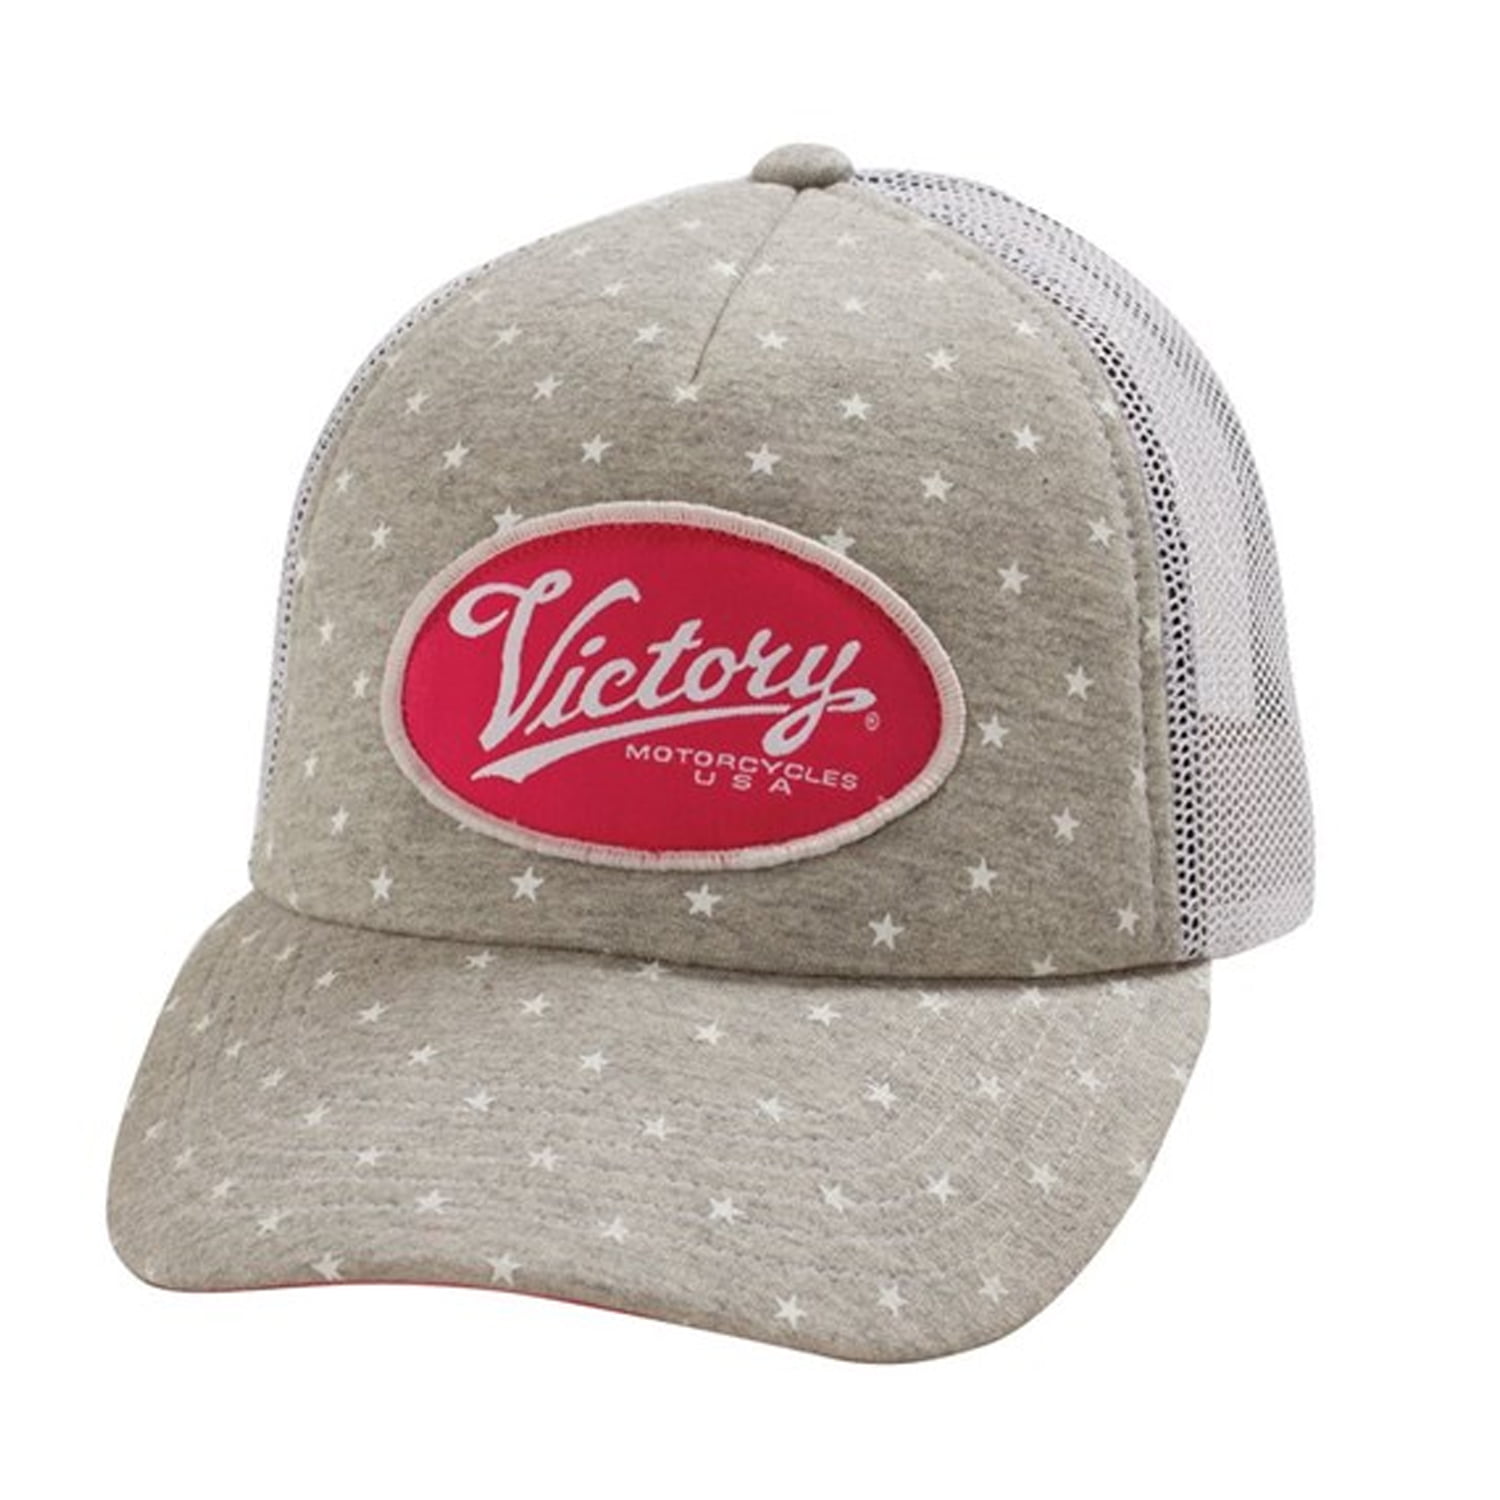 Brand New Victory Motorcycle Flames Grey/Black Hat 